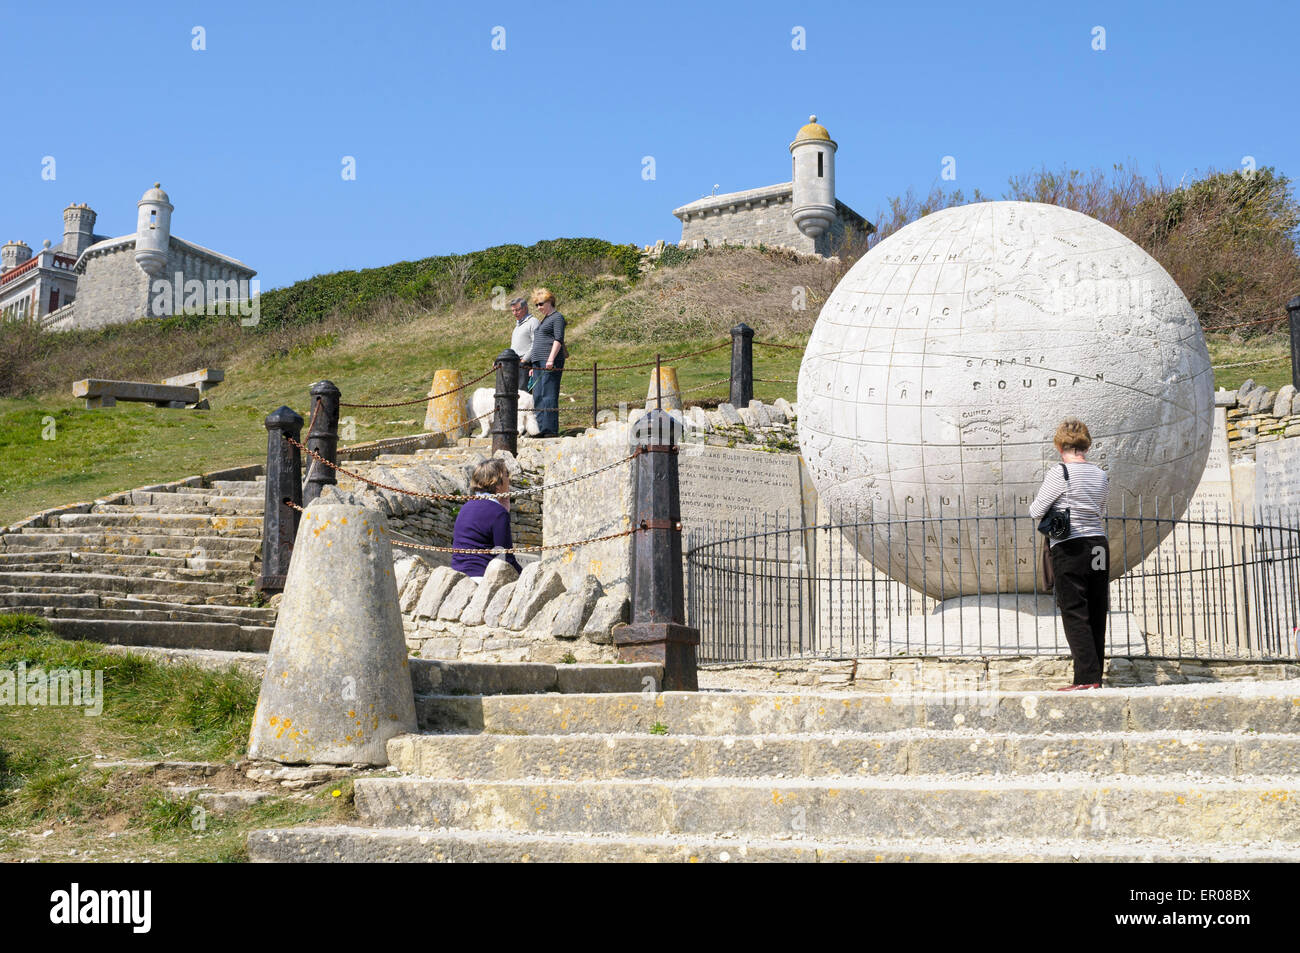 Tourists discussing the Great Globe, Durlston Country Park, Swanage, Dorset, England. Stock Photo